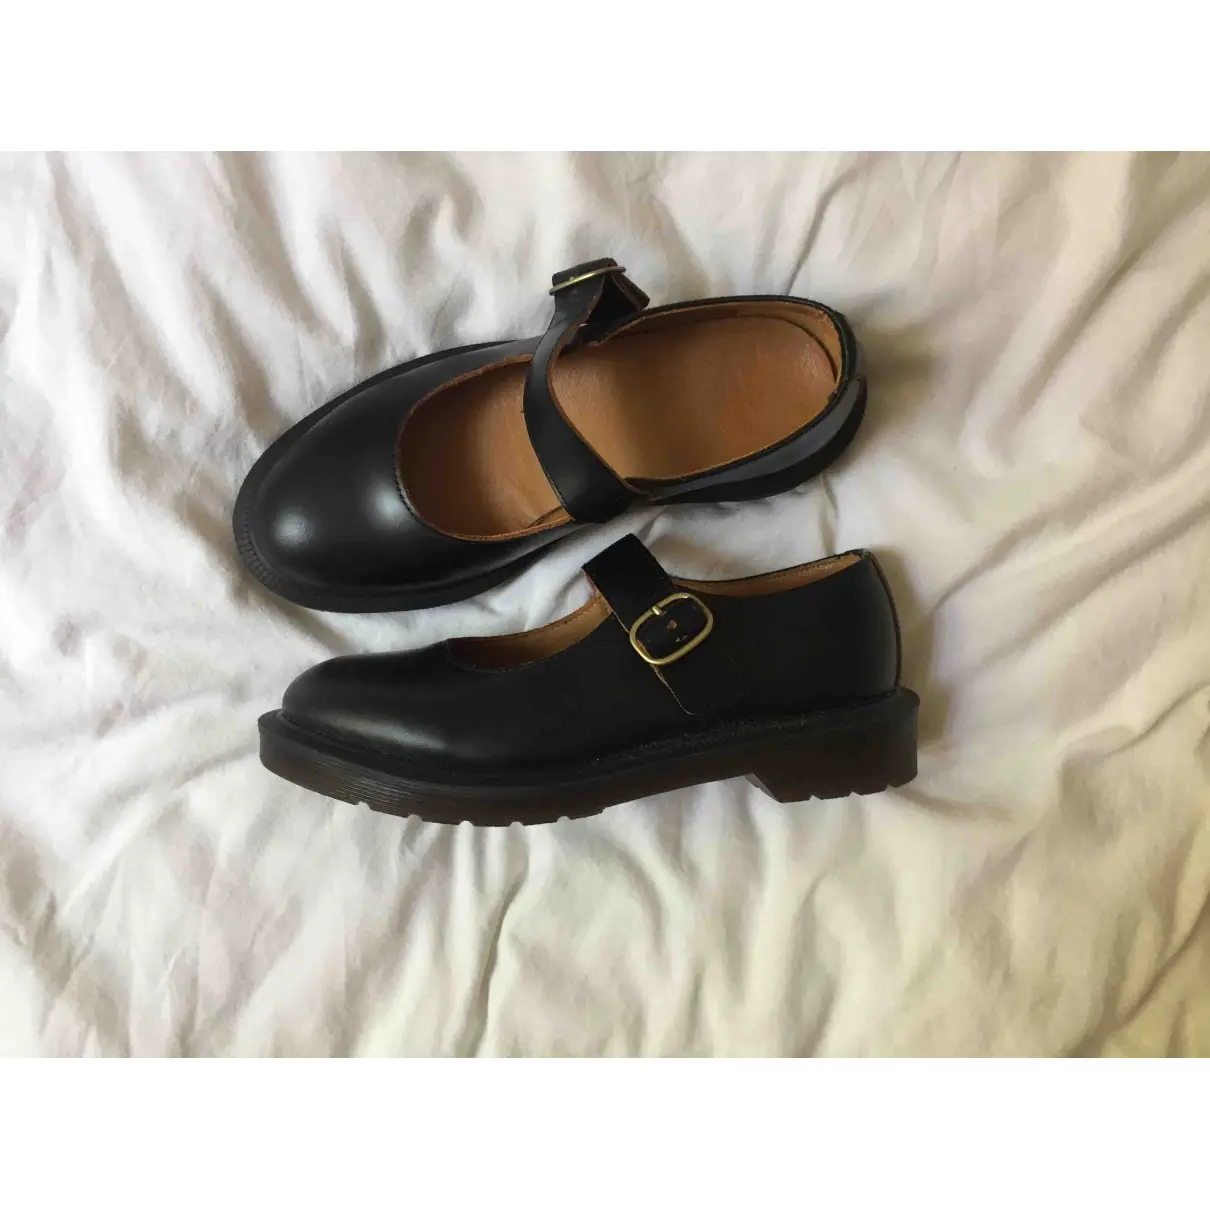 Dr. Martens 8065 (Mary Jane) leather flats for sale